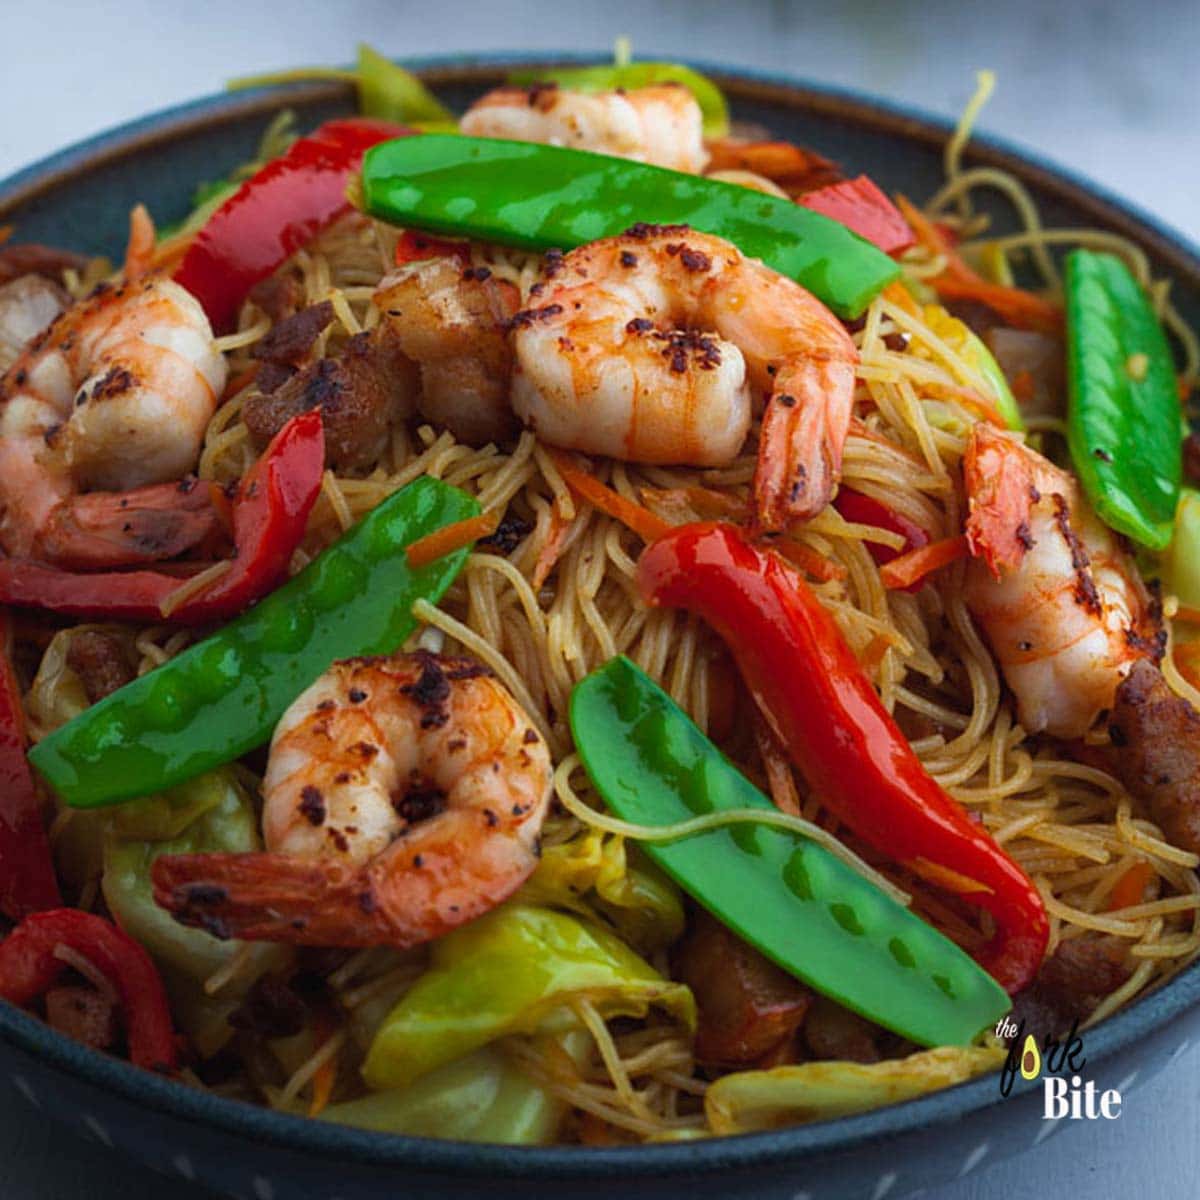 This Chow Mei Fun is super easy to make at home. Now, you can skip the take out as this will take you less than 30 minutes to cook. So fire up the wok and make an eat-in feast at home instead of delivery.